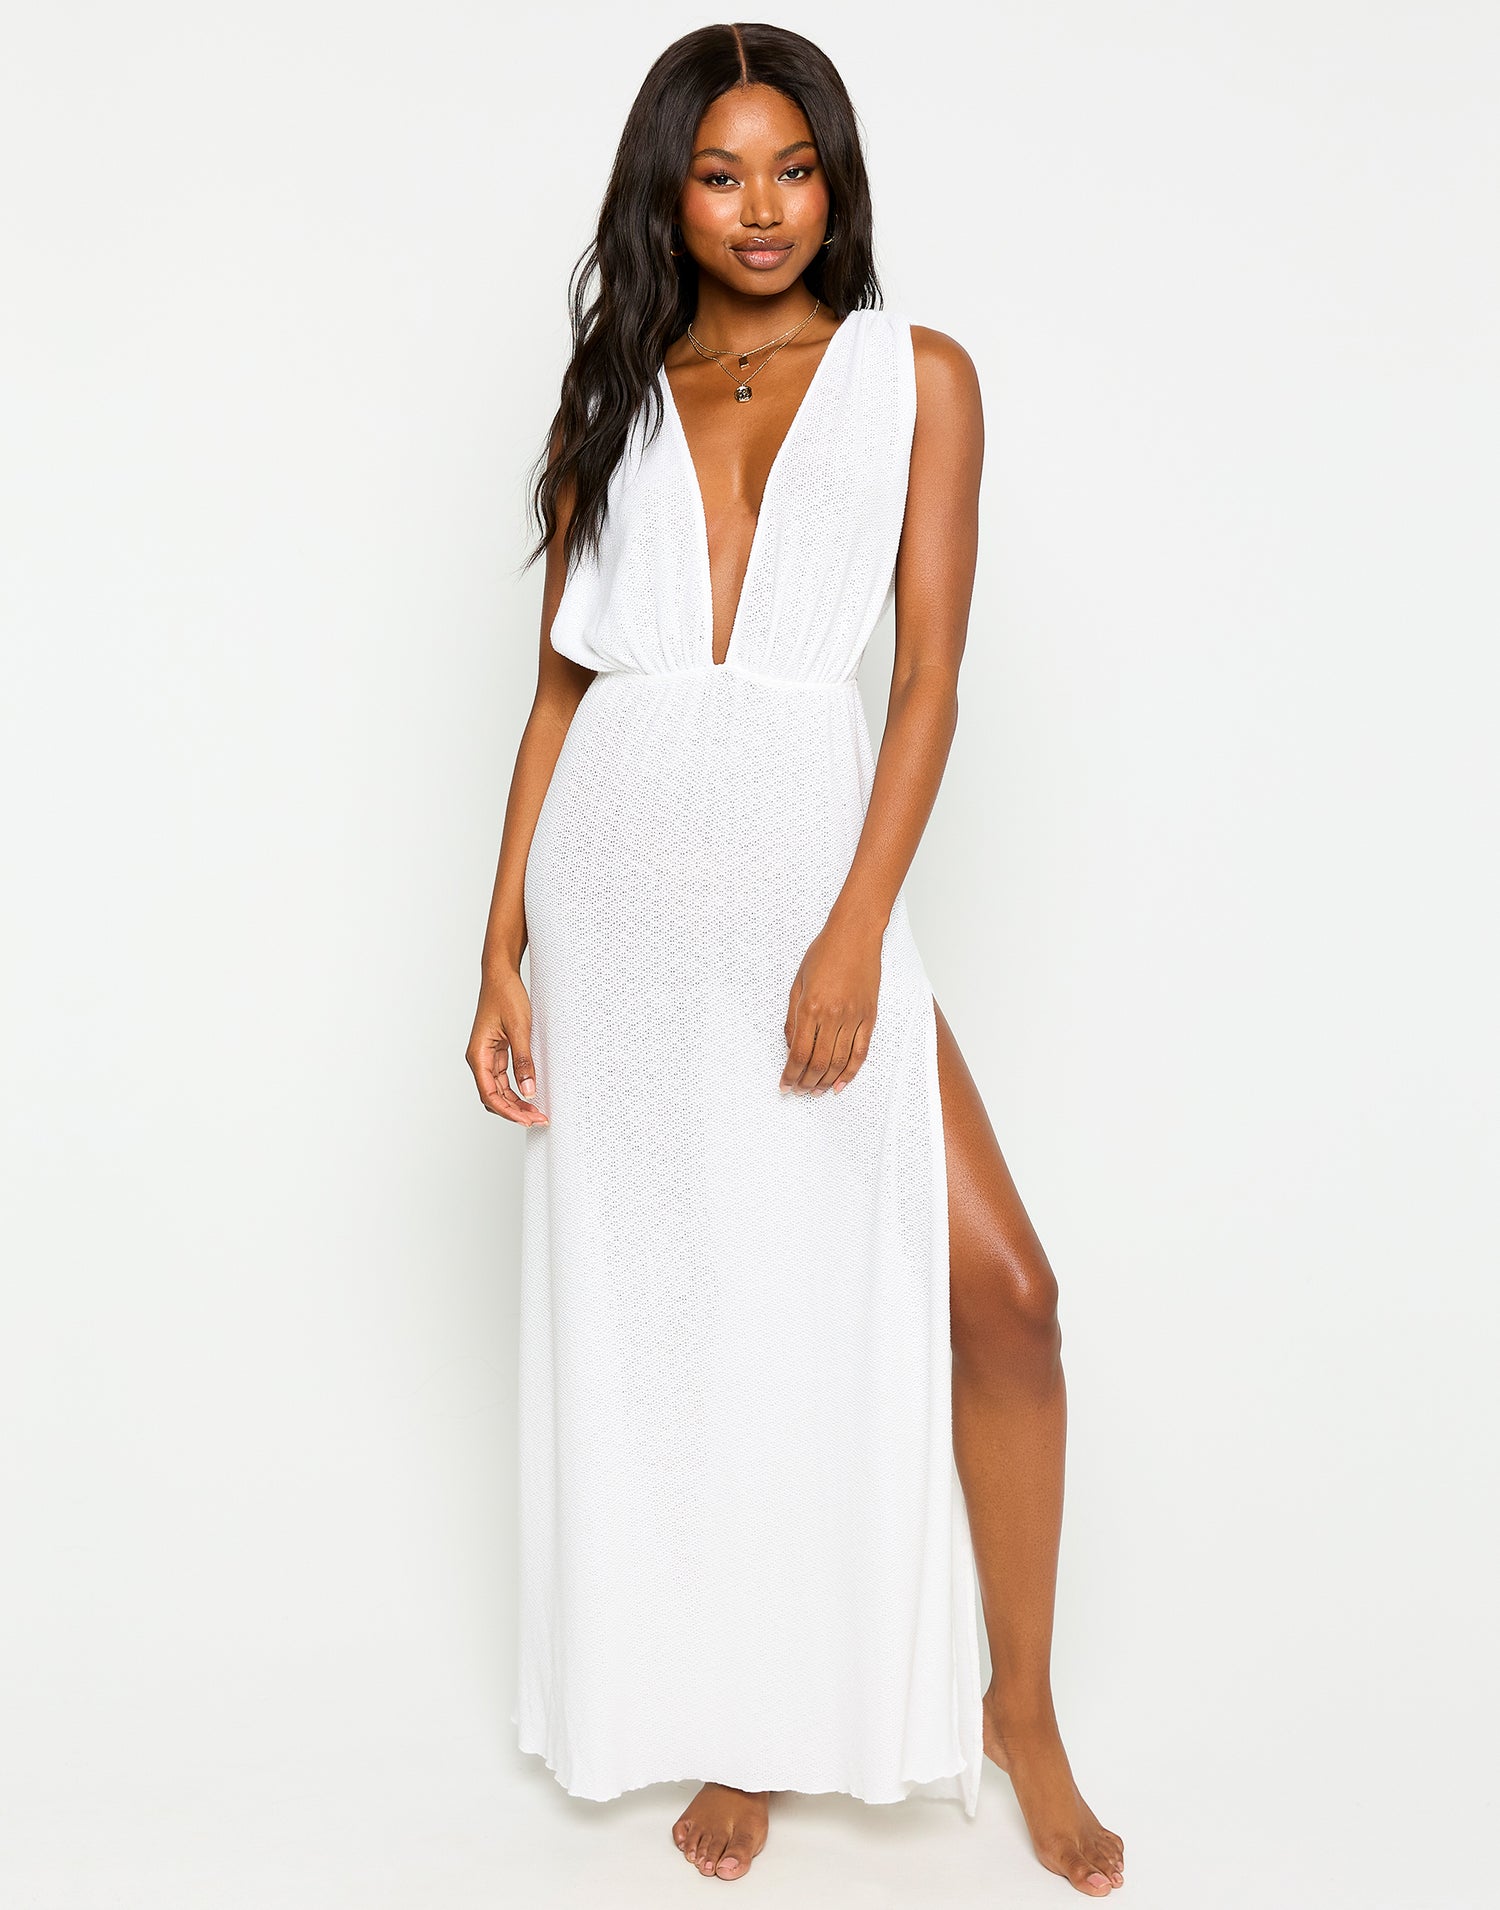 Annika Beach Cover Up Maxi Dress in White - Alternate Front View